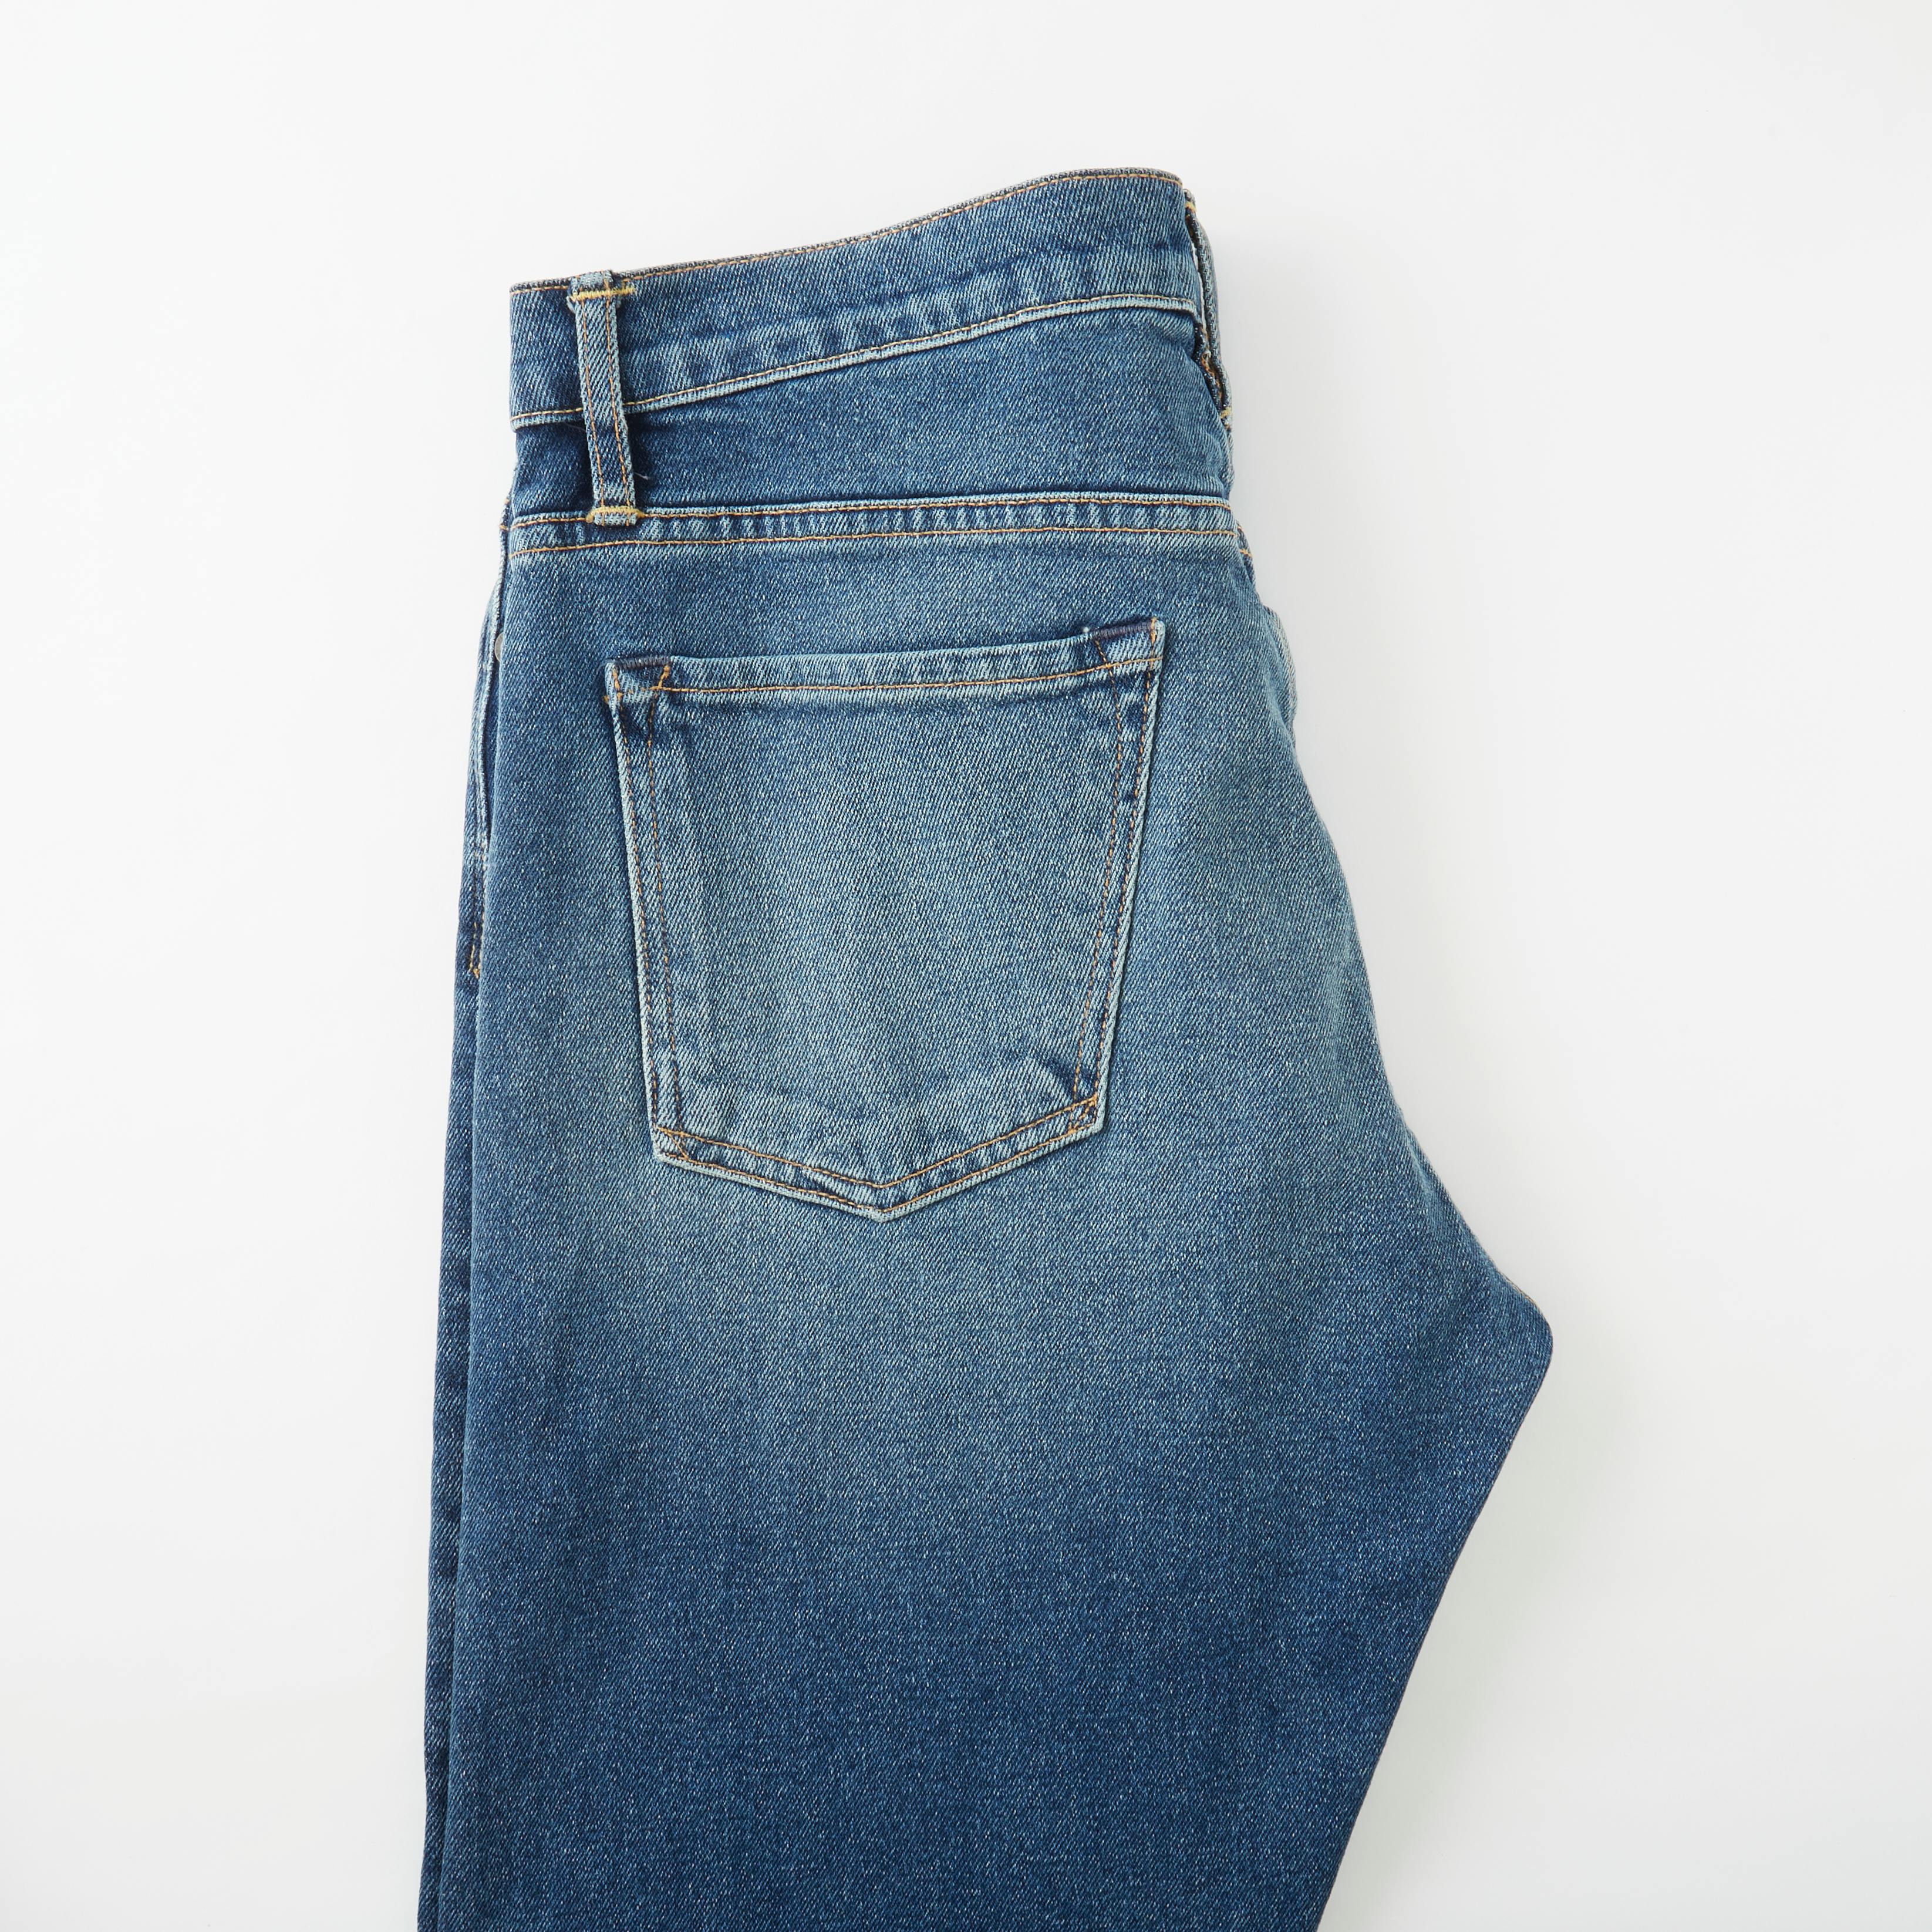 Flint and Tinder All-American Stretch Denim - Tapered